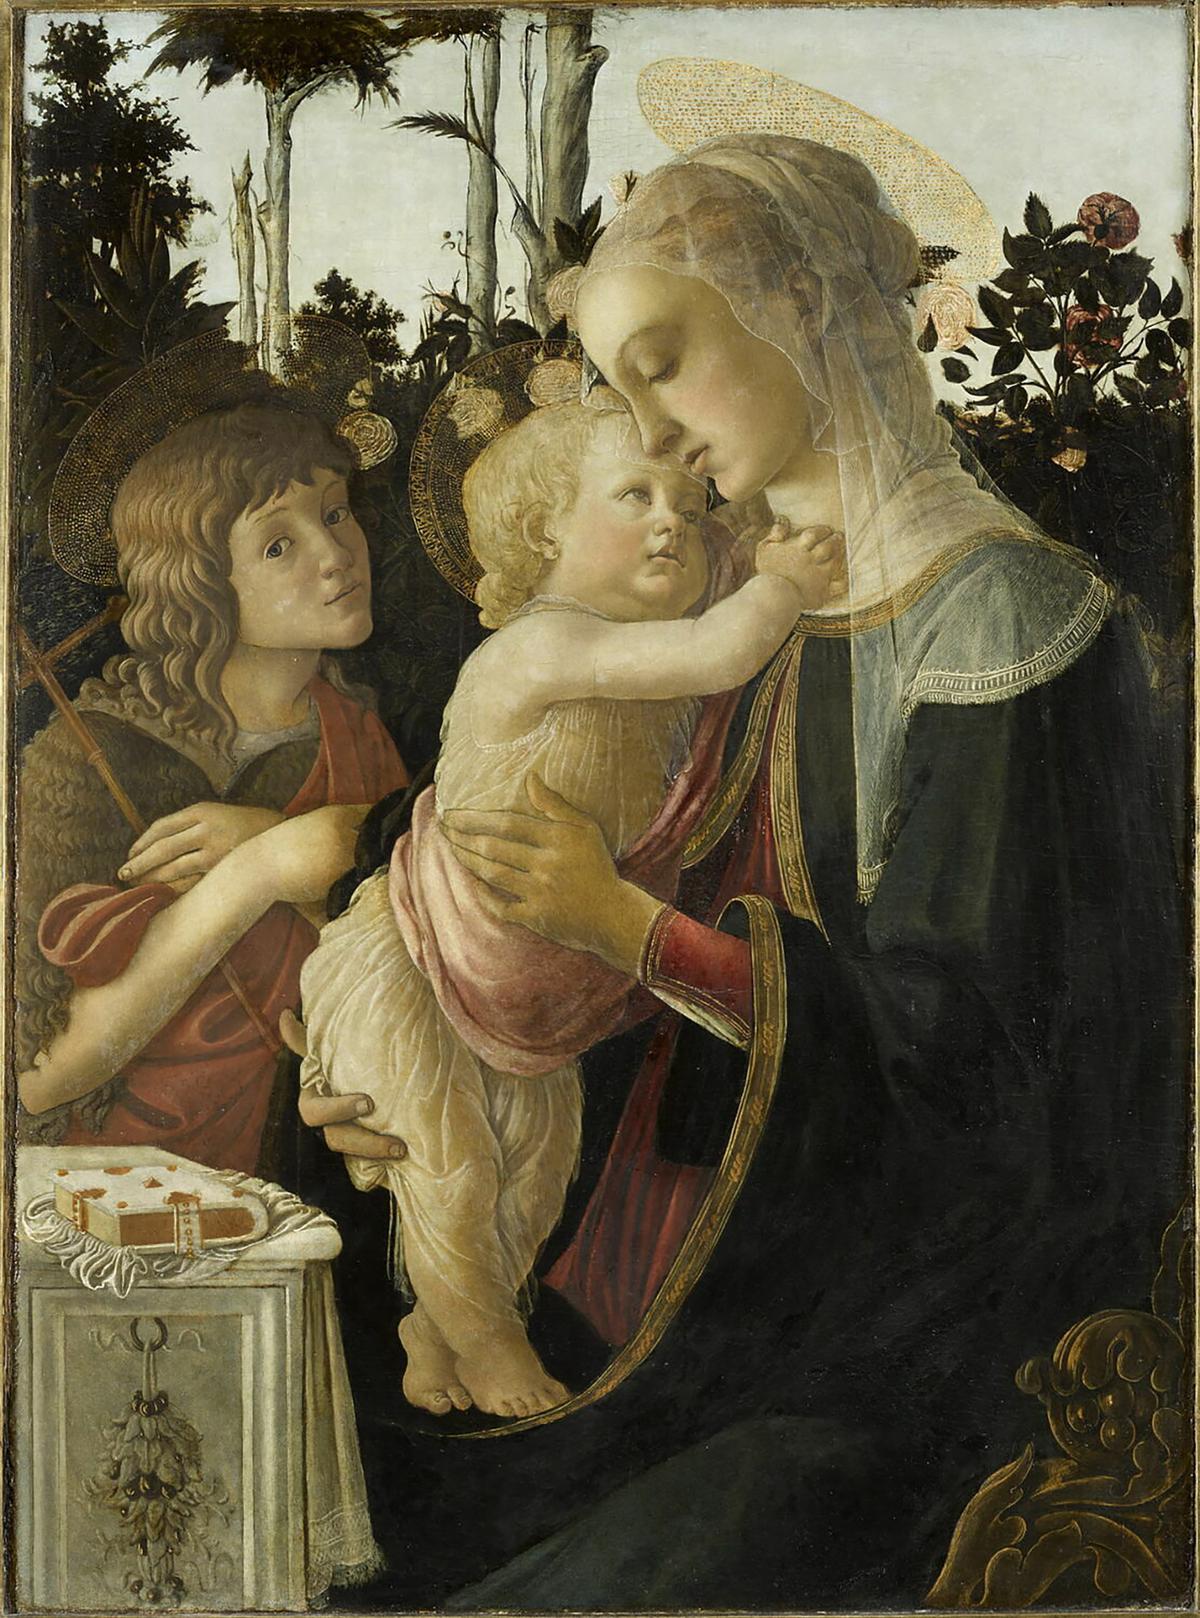 “The Virgin and Child with the Young Saint John the Baptist (‘Madonna of the Rose Garden’),” circa 1468, by Sandro Botticelli. Tempera and gold on poplar panel: 35 3/4 inches by 26 3/8 inches. The Louvre, Paris. (Courtesy of Legion of Honor)